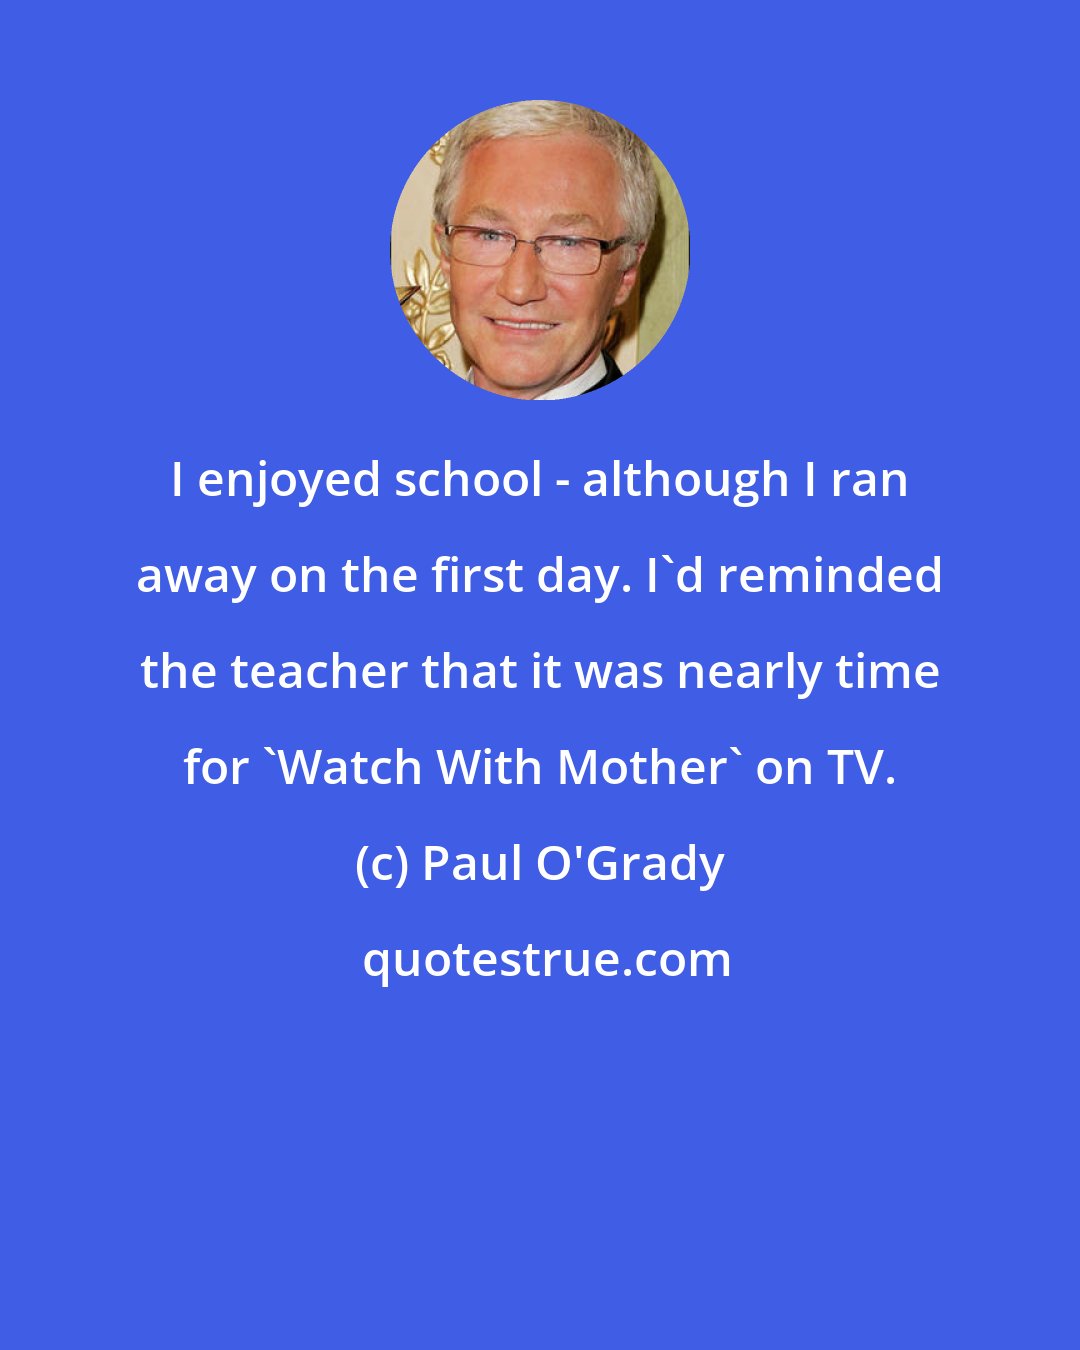 Paul O'Grady: I enjoyed school - although I ran away on the first day. I'd reminded the teacher that it was nearly time for 'Watch With Mother' on TV.